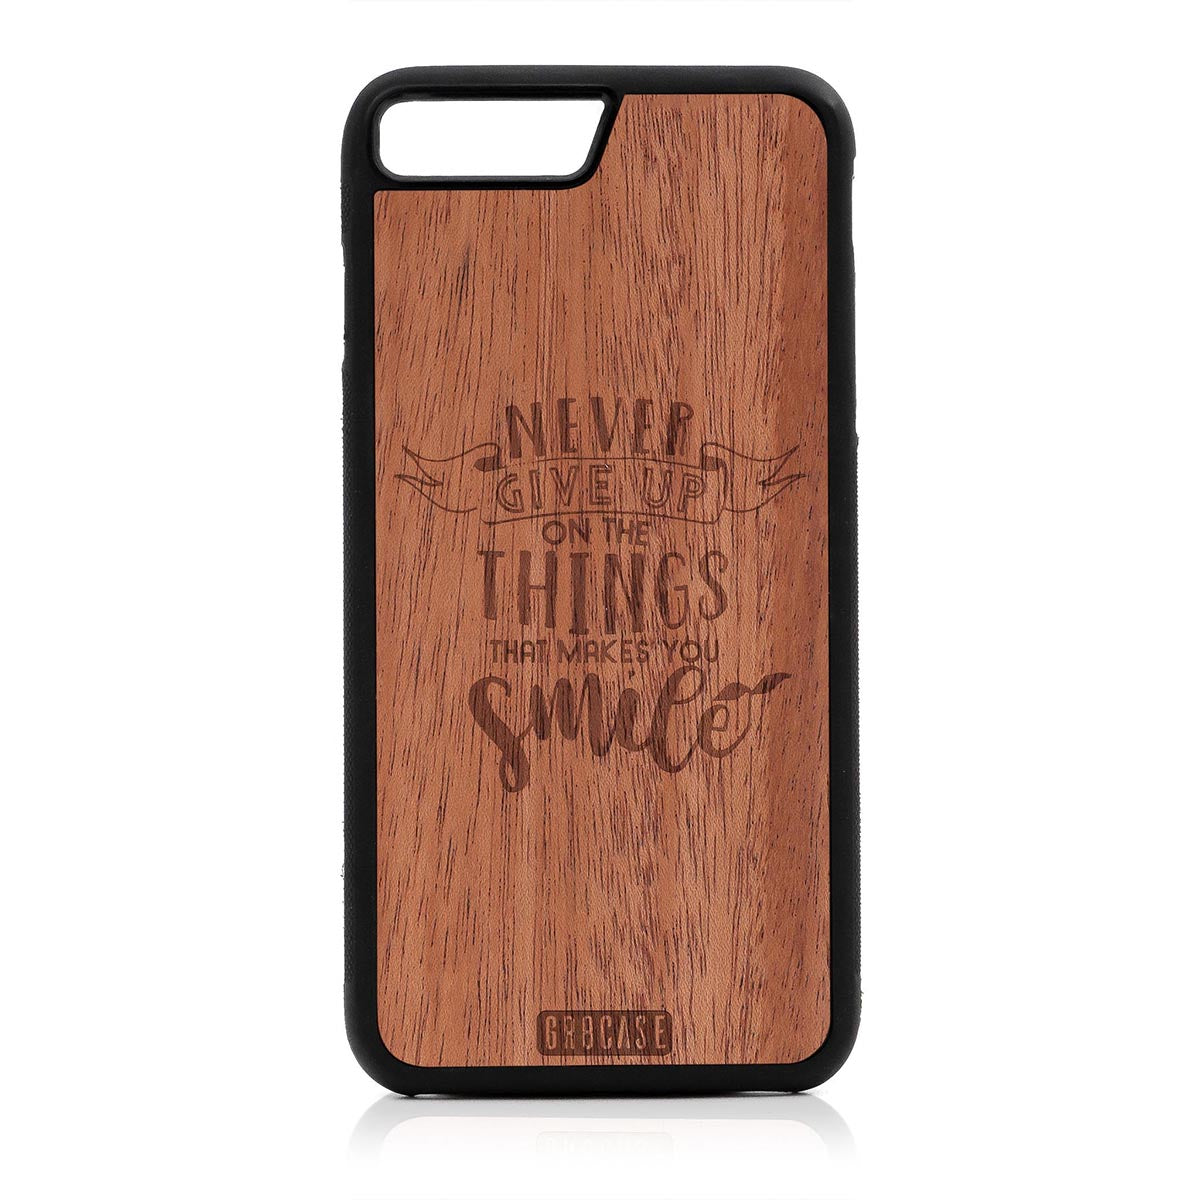 Never Give Up On The Things That Makes You Smile Design Wood Case For iPhone 7 Plus / 8 Plus by GR8CASE